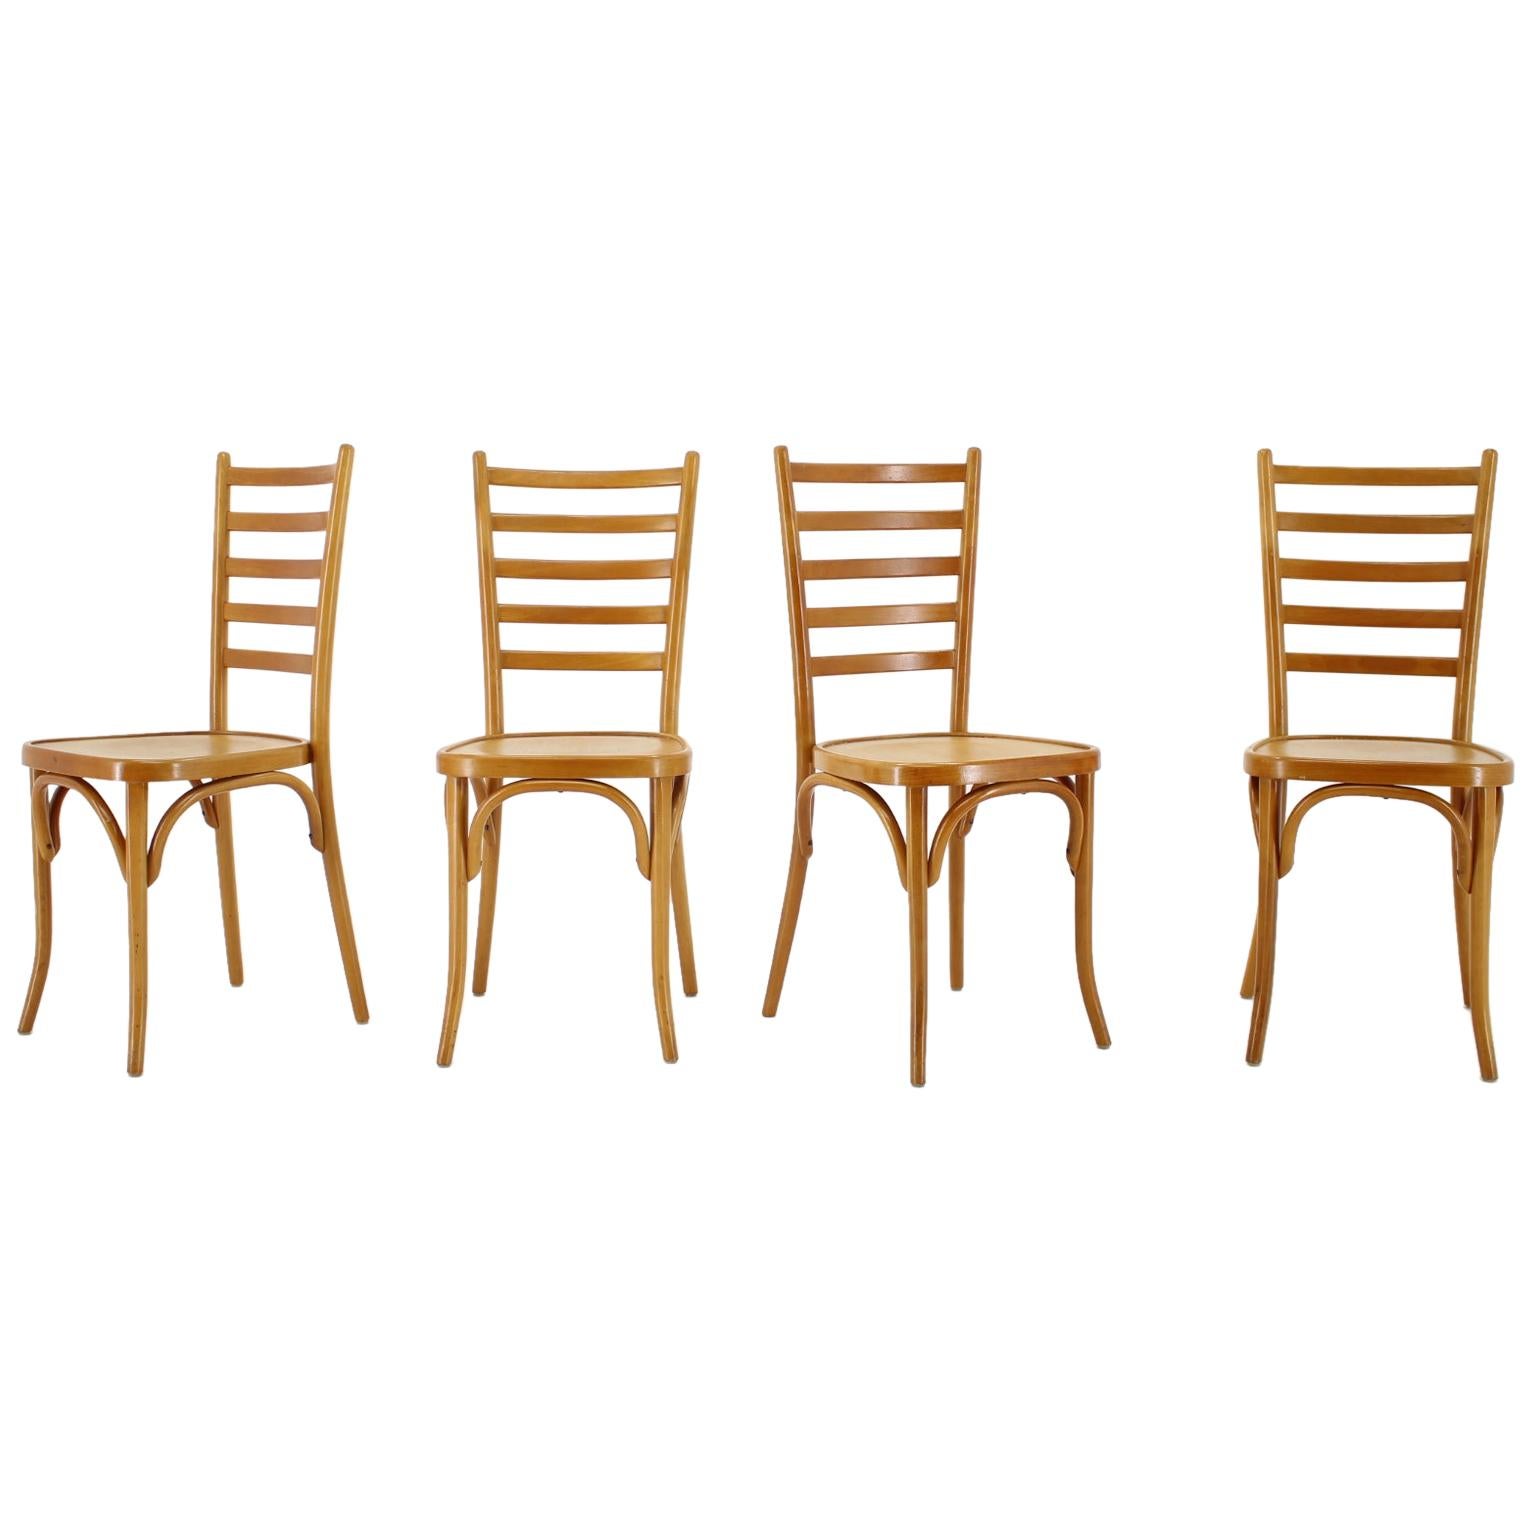 1970s Italian Dining Chairs, Set of 4